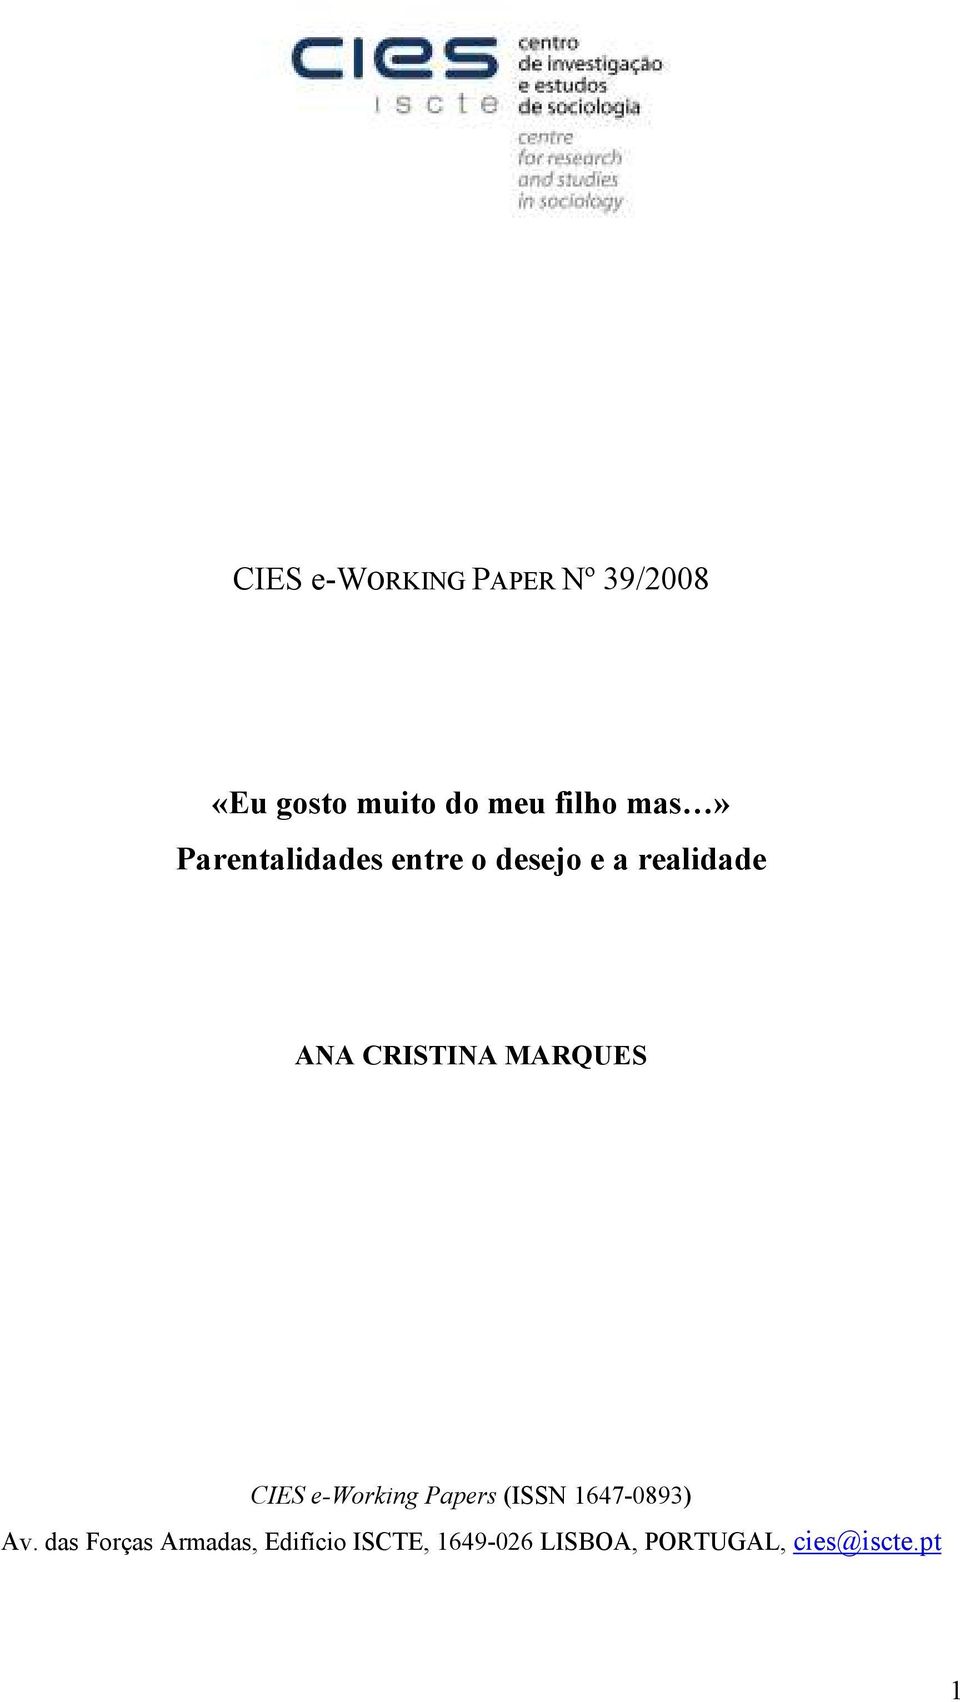 MARQUES CIES e-working Papers (ISSN 1647-0893) Av.